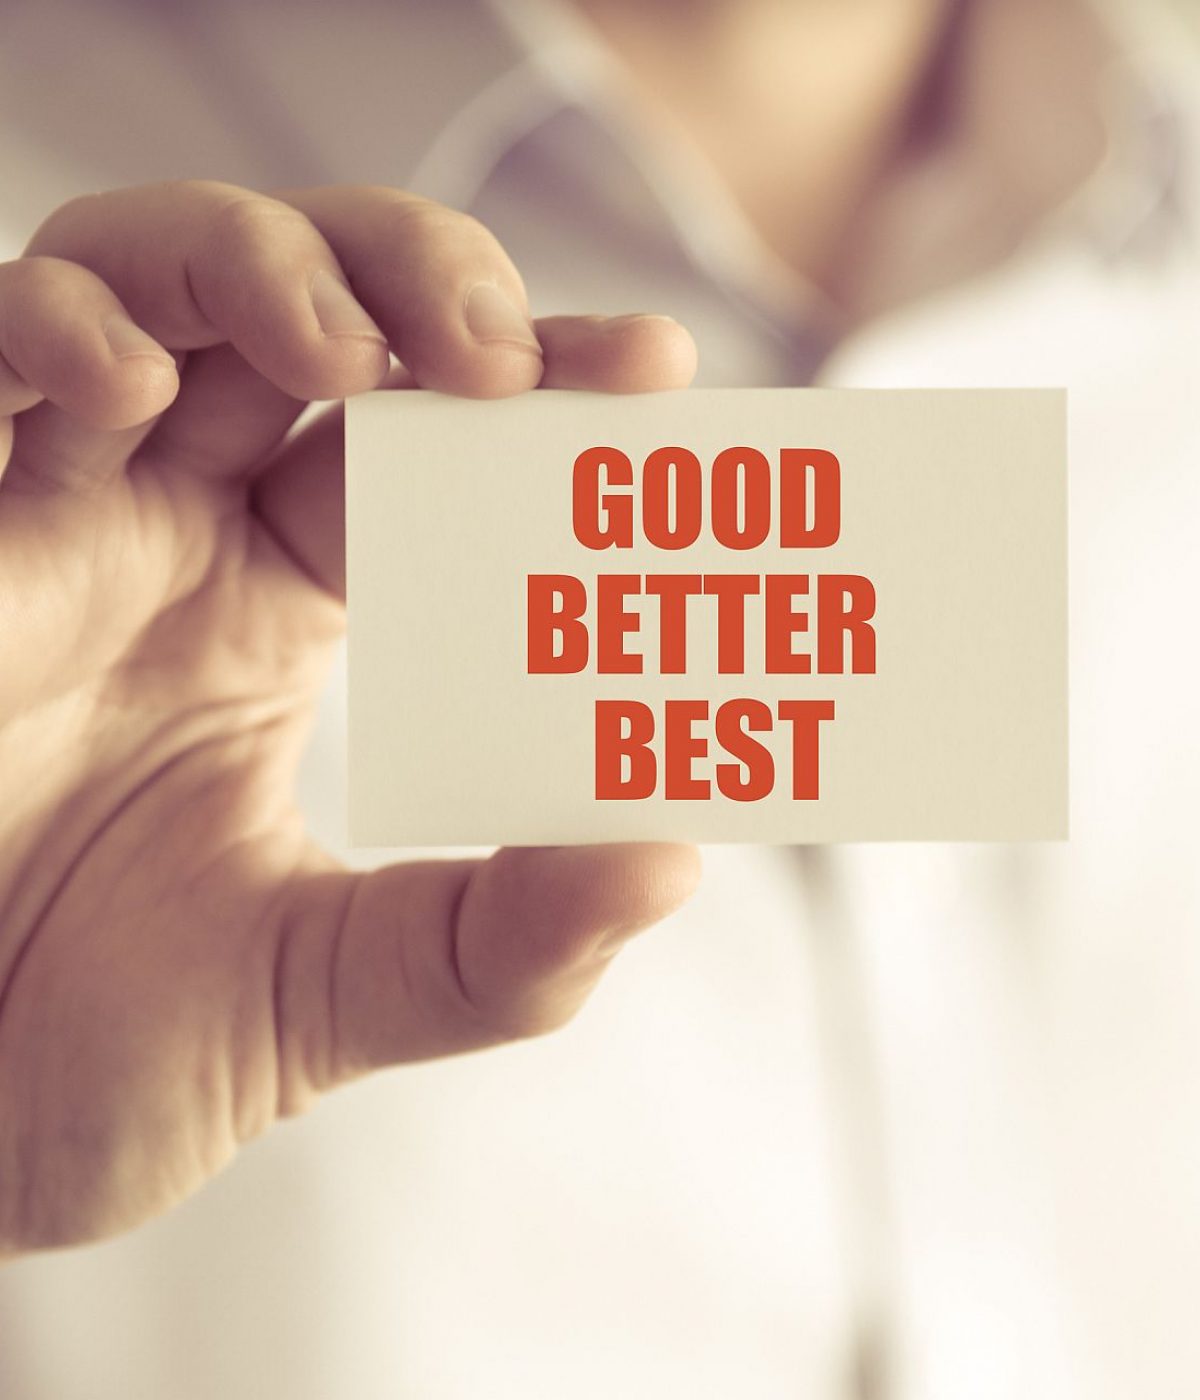 Closeup on businessman holding a card with text GOOD BETTER BEST business concept image with soft focus background and vintage tone